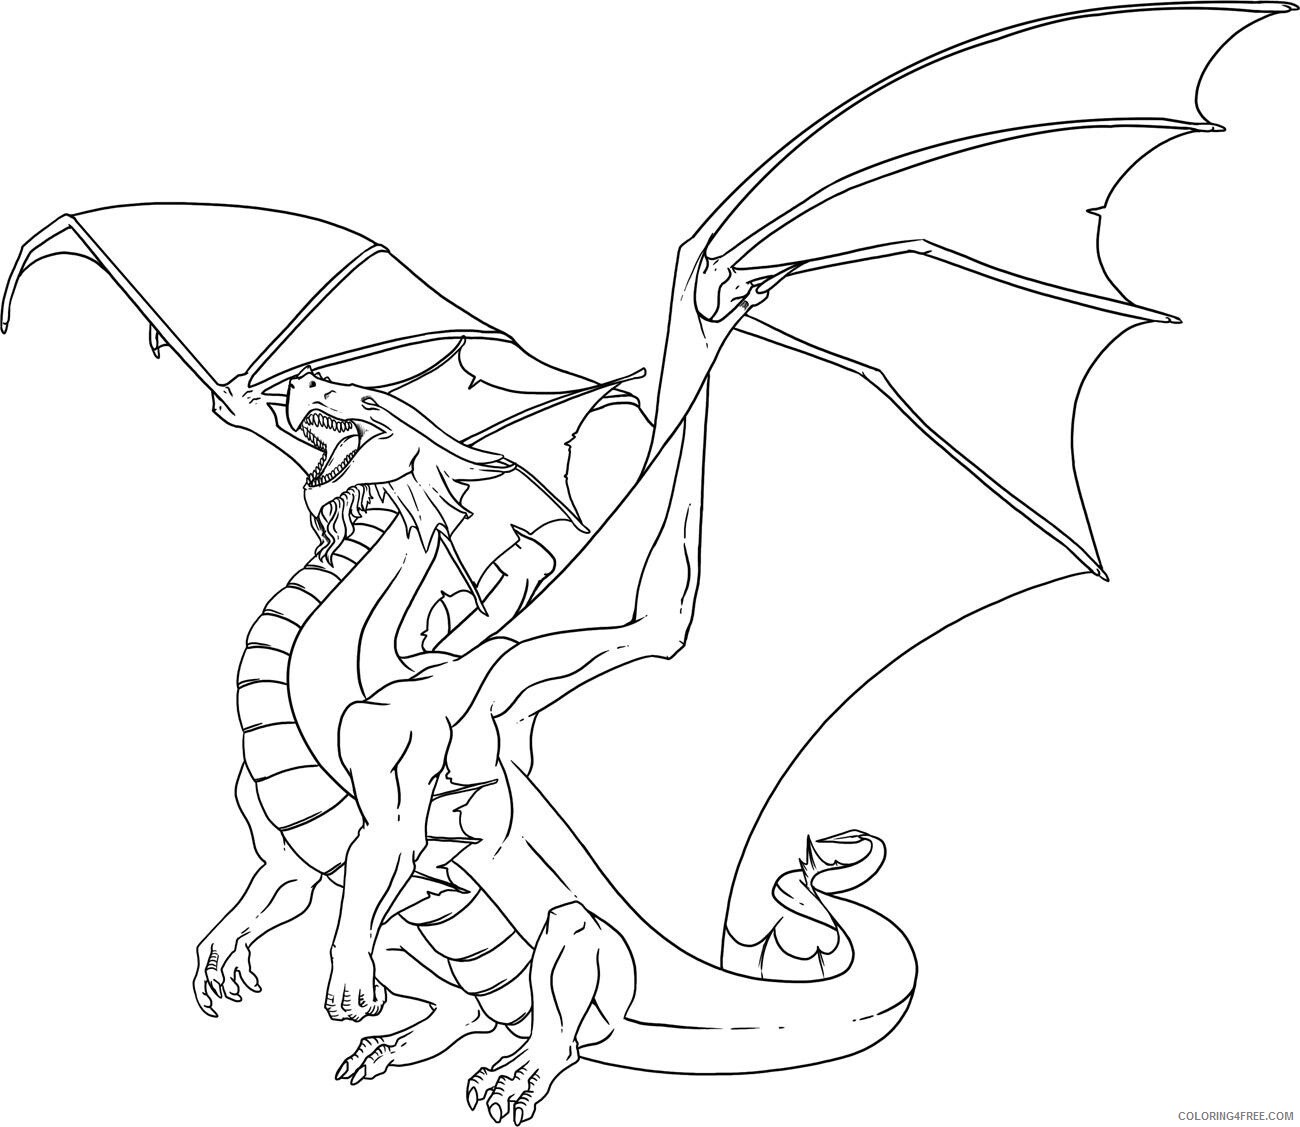 Fantasy Dragons Coloring Pages Dragon for Adult Printable 2021 2582 Coloring4free